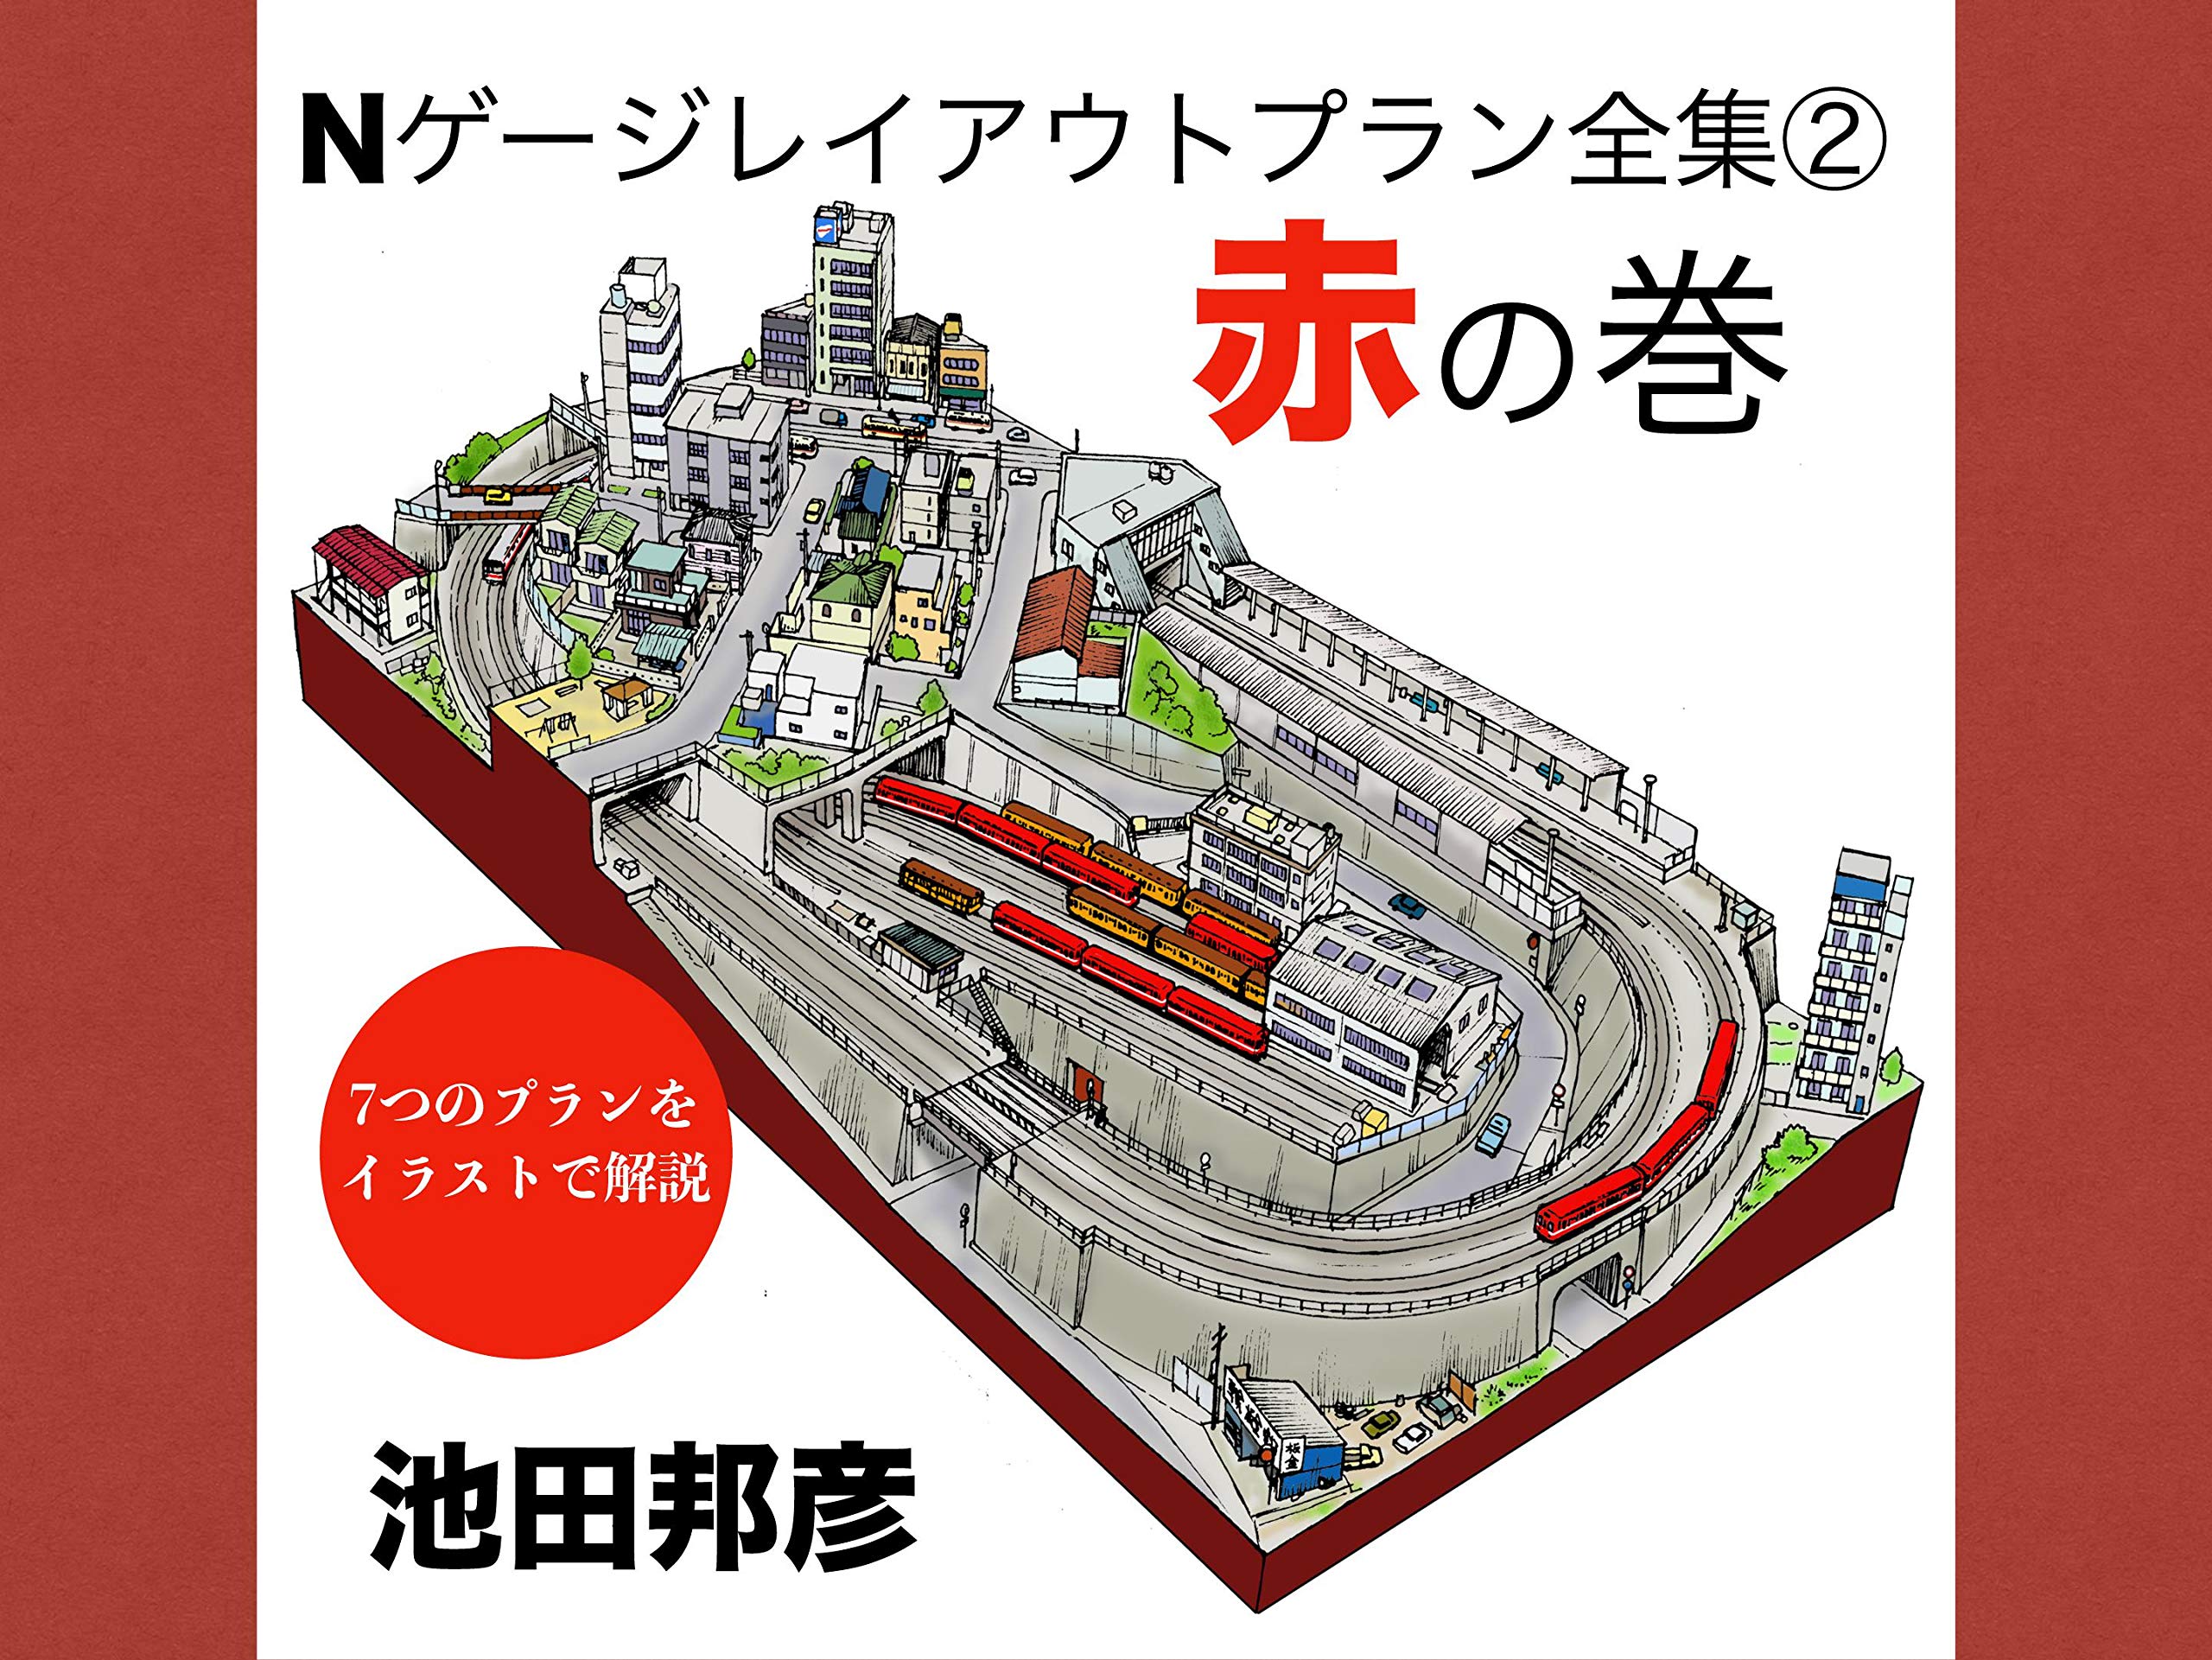 N gauge layout plans archive2 red edition (Japanese Edition)